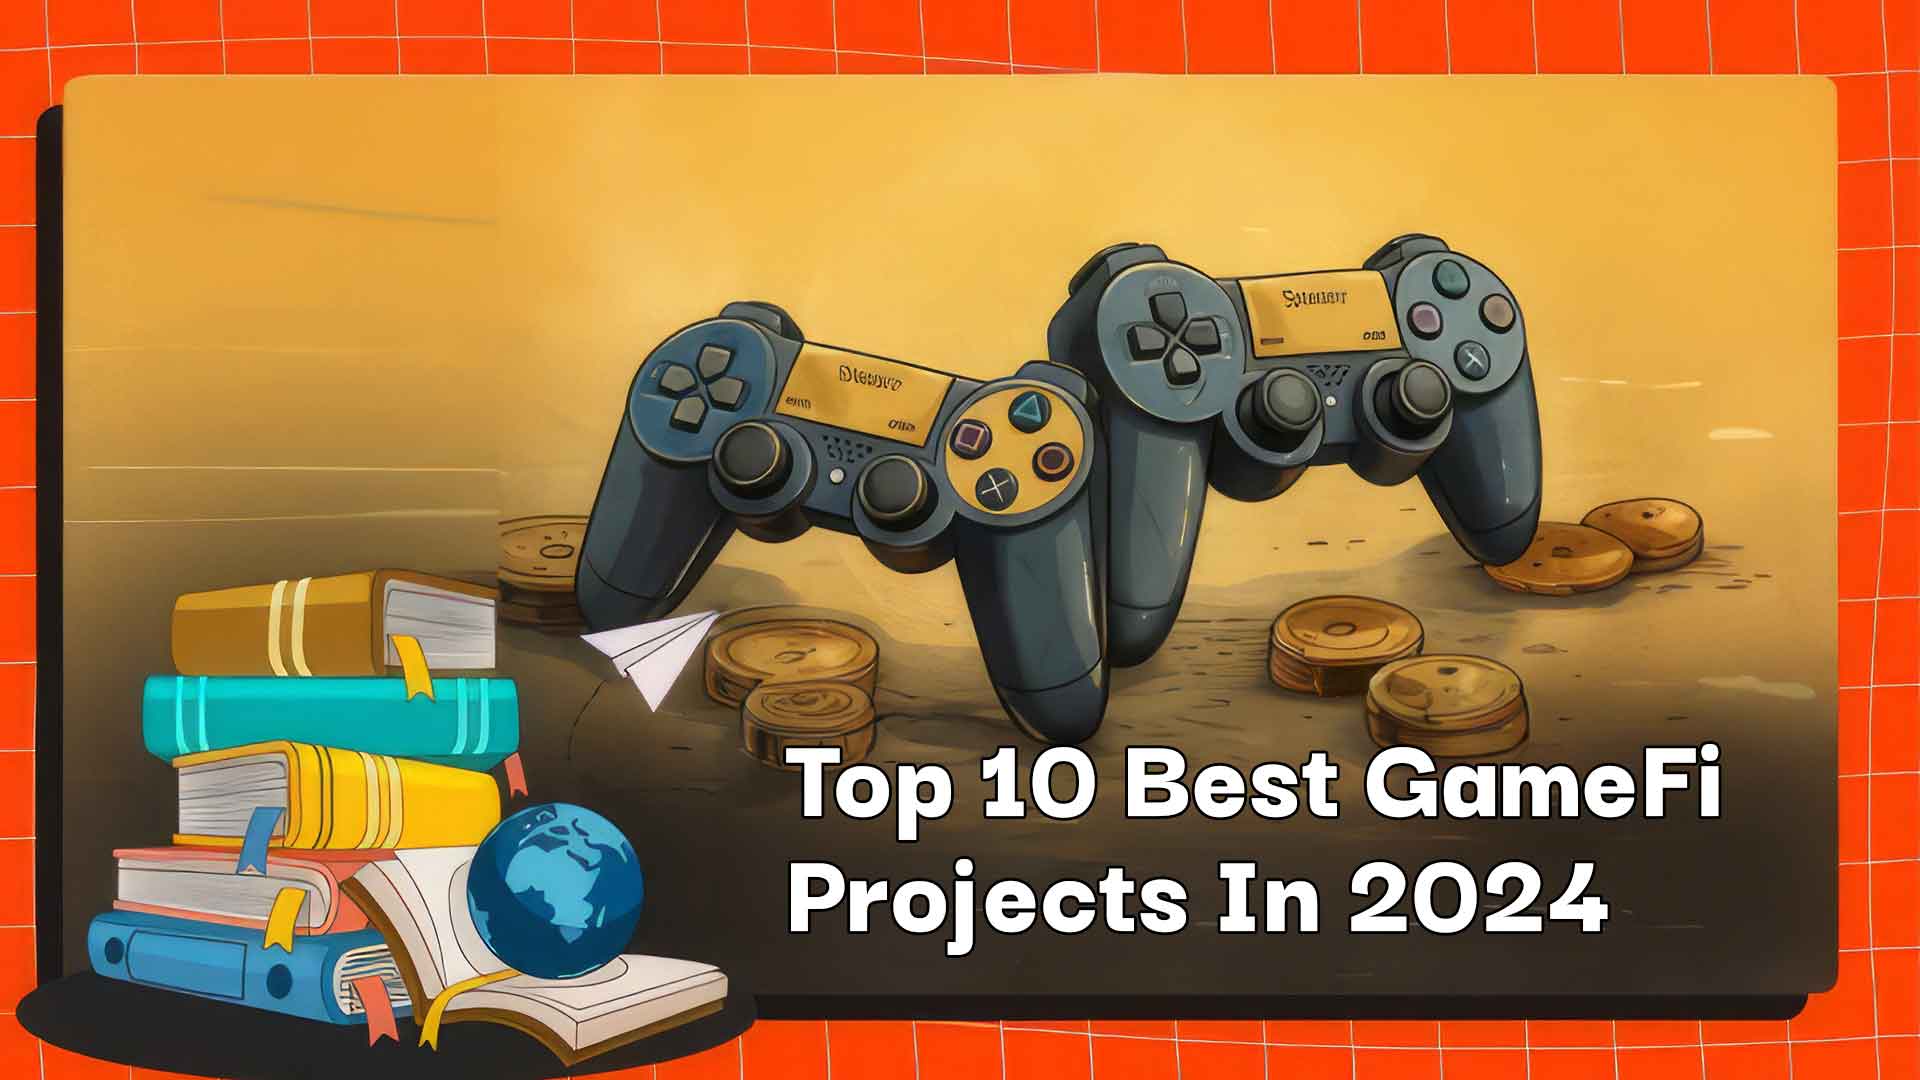 Top 10 Best GameFi Projects In 2024